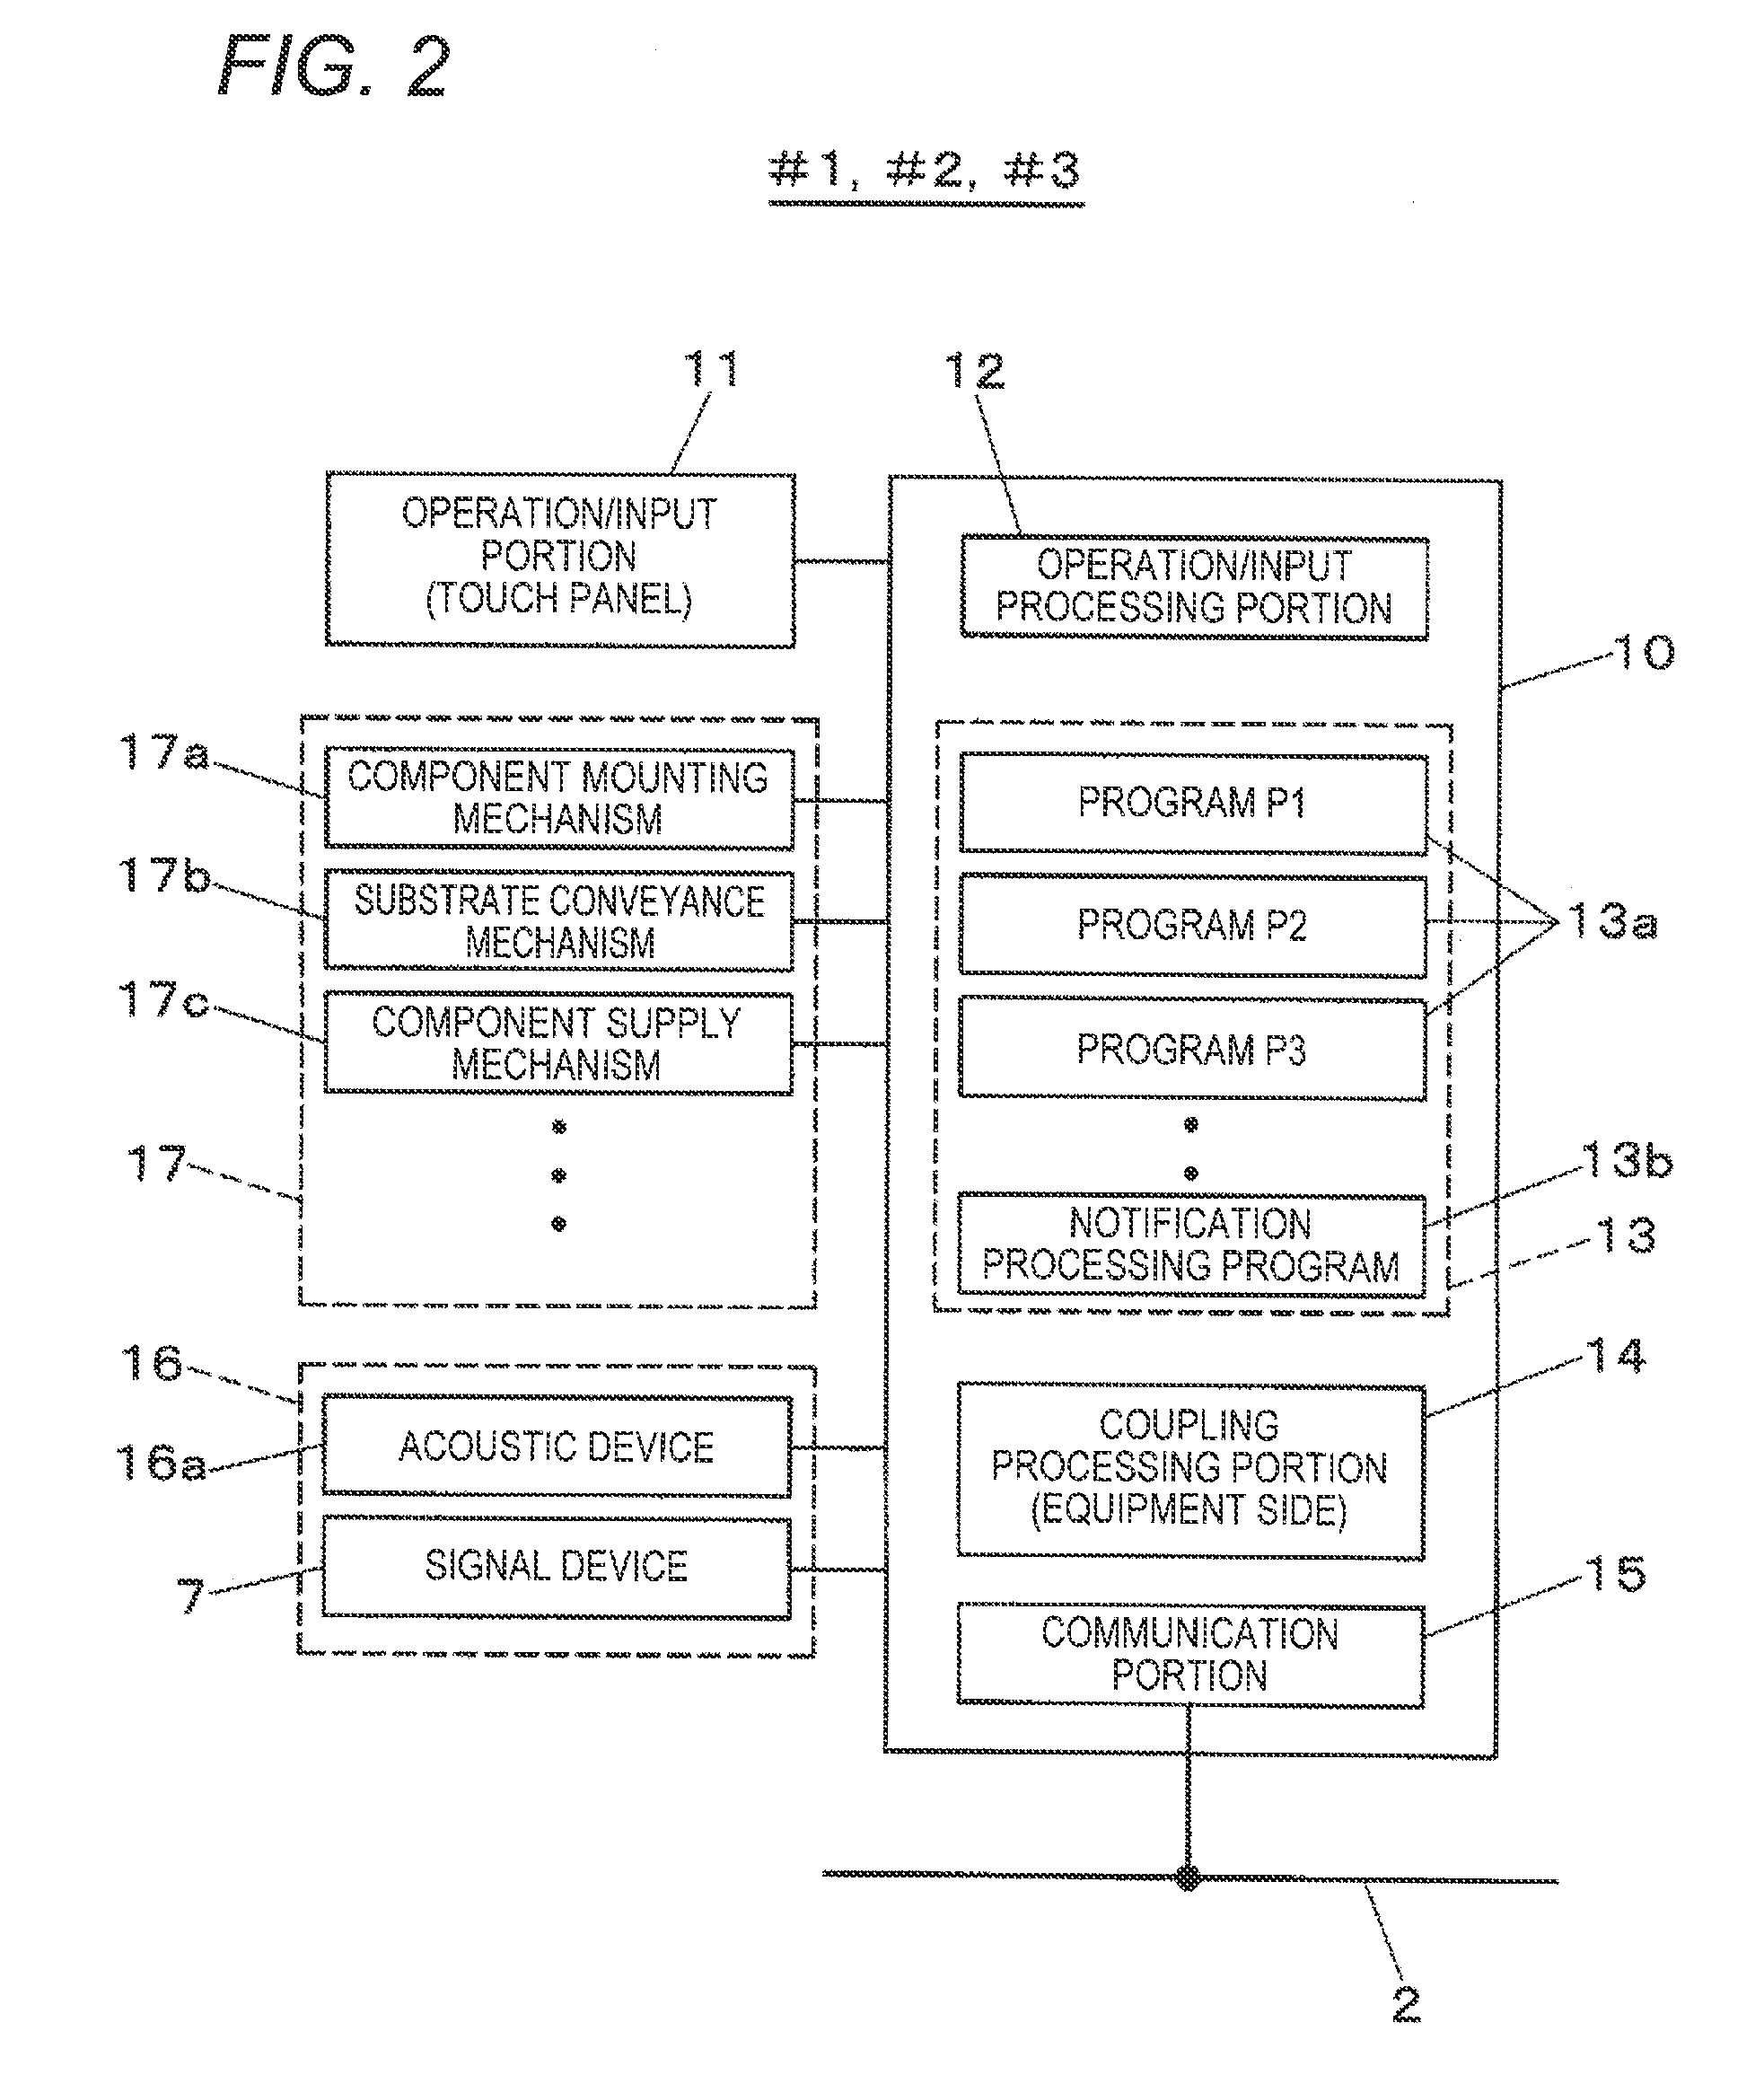 Component mounting system